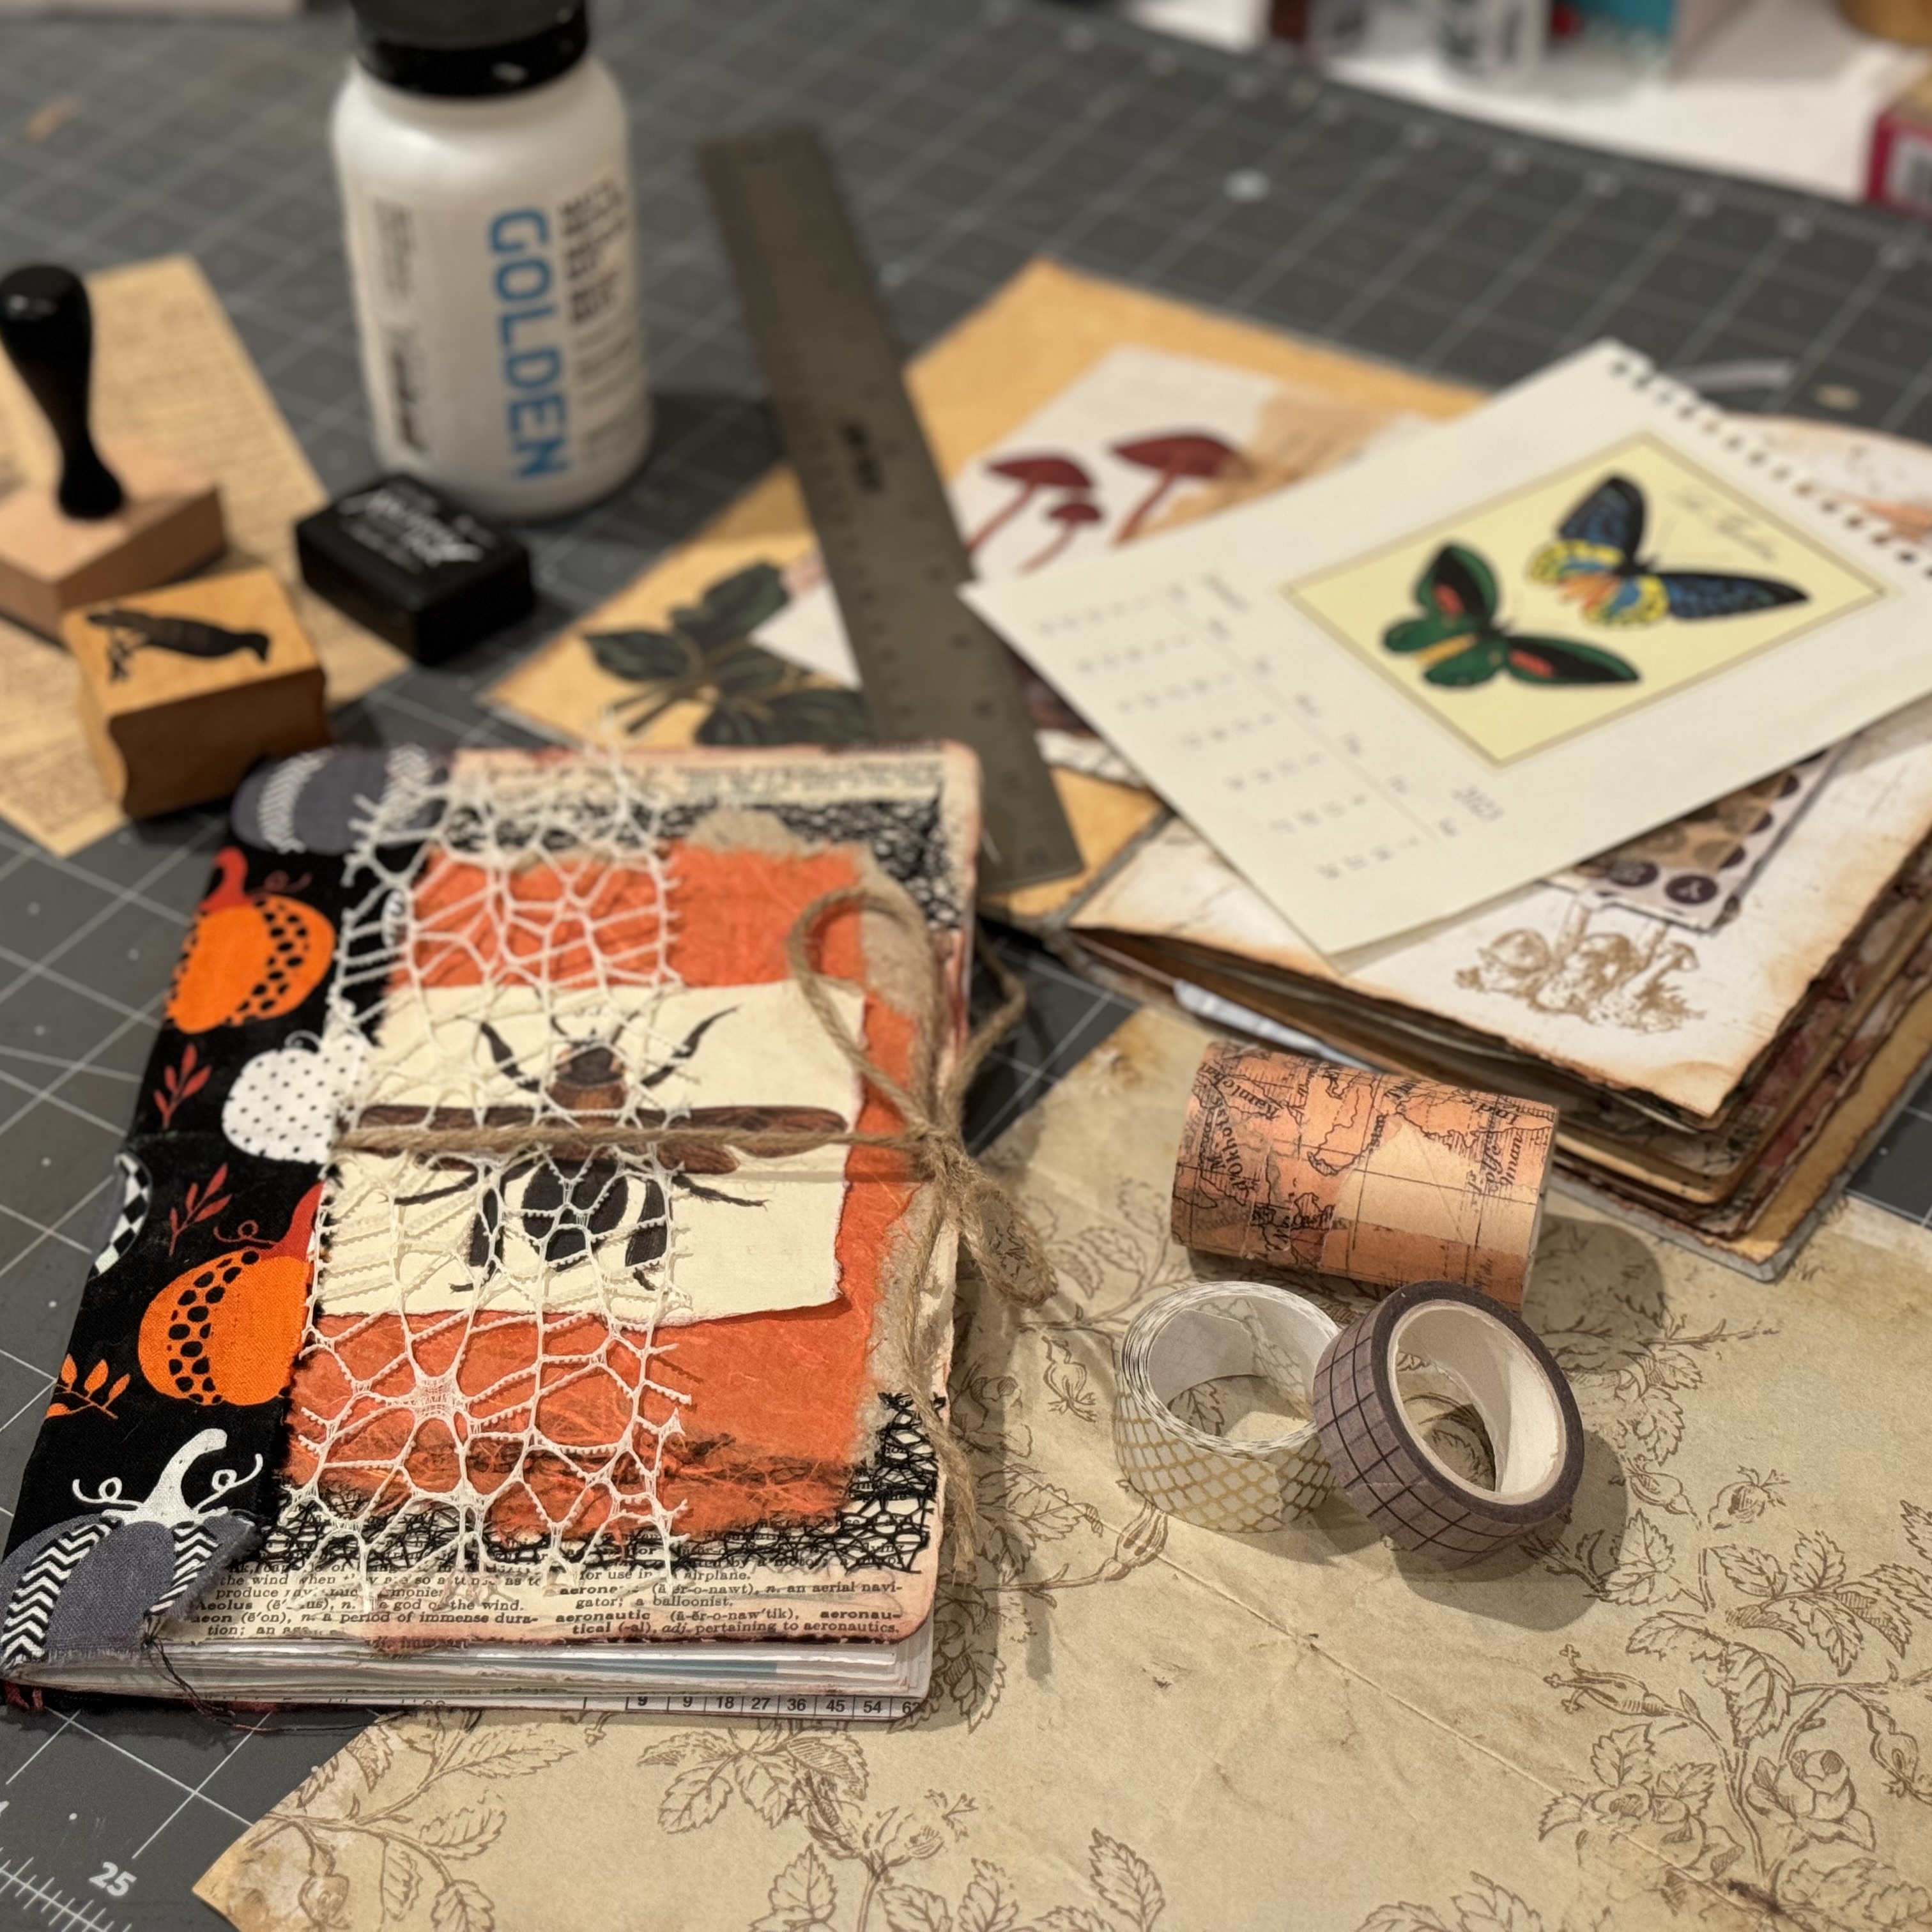 Youth Maker Mondays: Junk Journal Making (Ages 10-14)